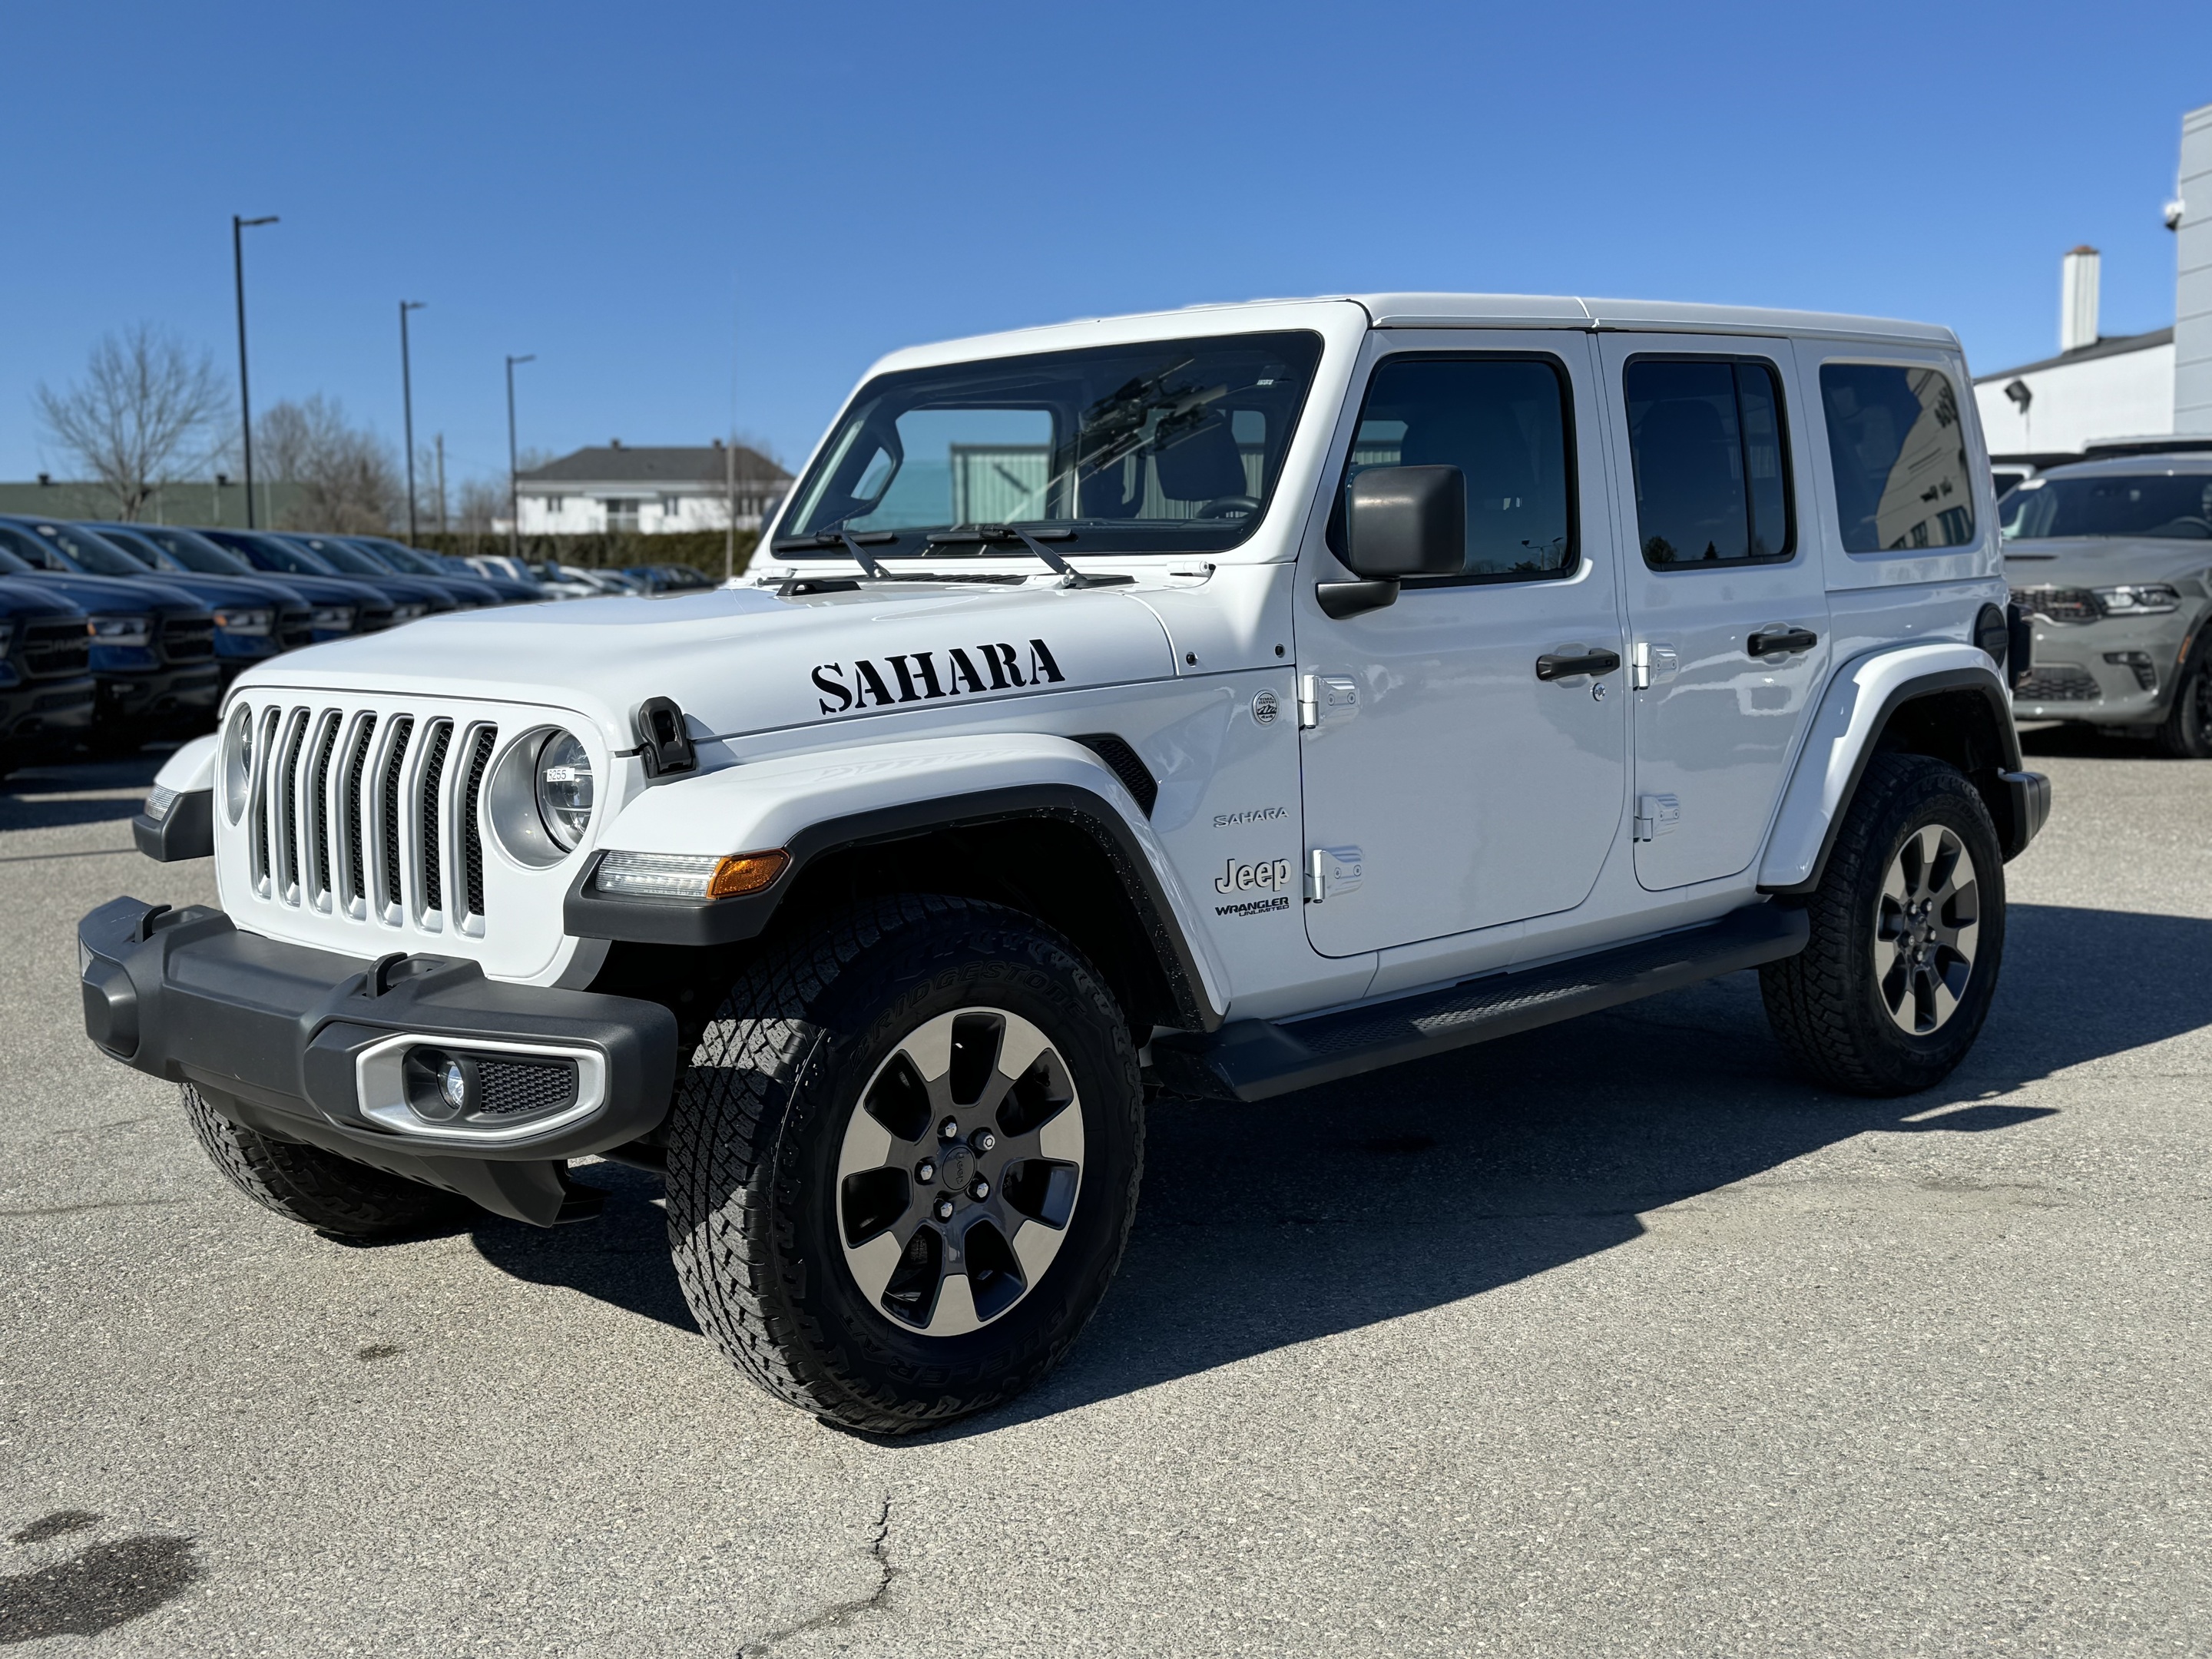 2019 Jeep WRANGLER UNLIMITED SAHARA 4X4 TEMPS FROID / DEL / NAVIGATION / HITCH